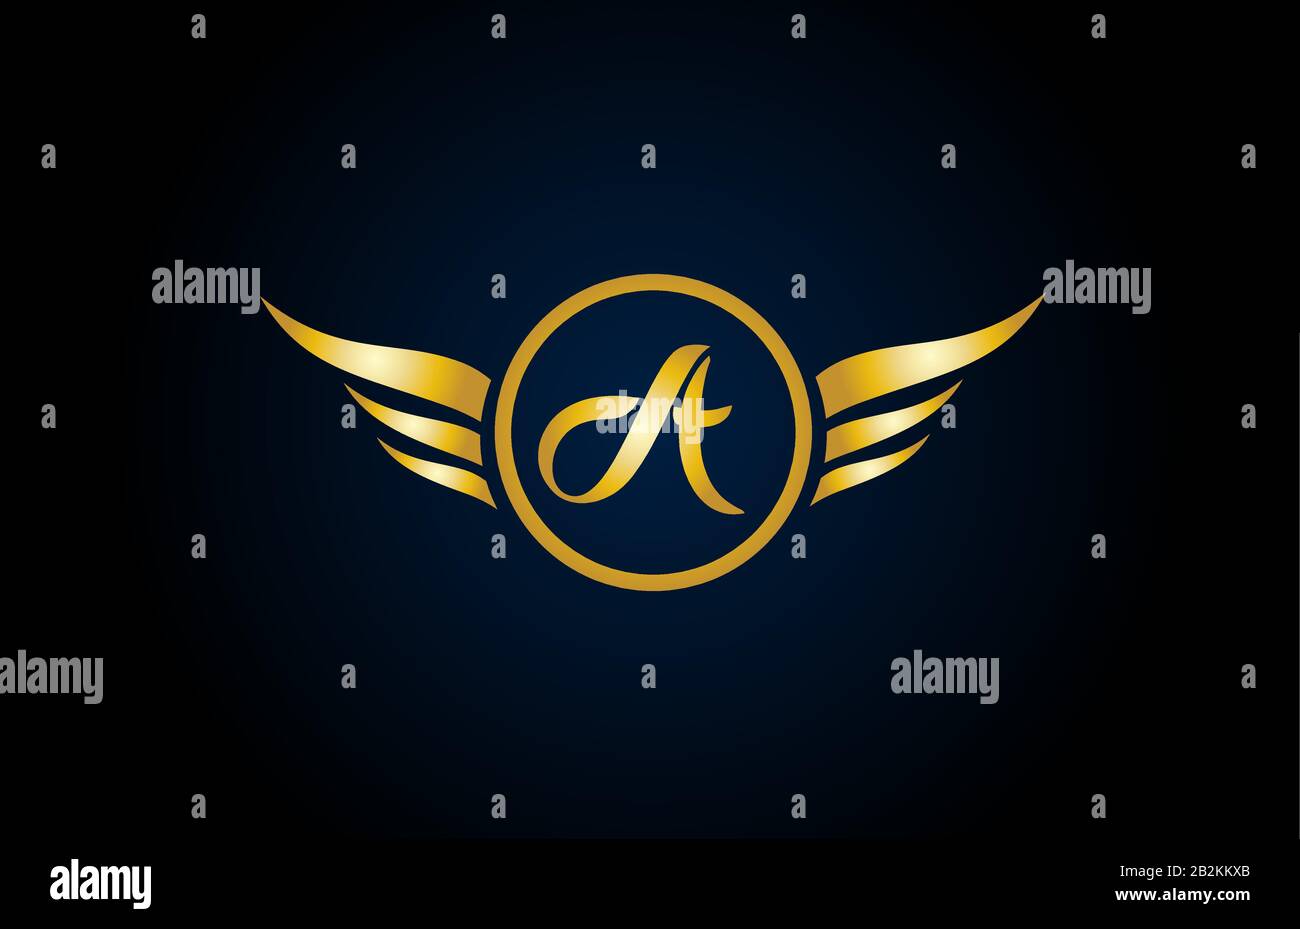 gold golden A wing wings alphabet letter logo icon with classy ...